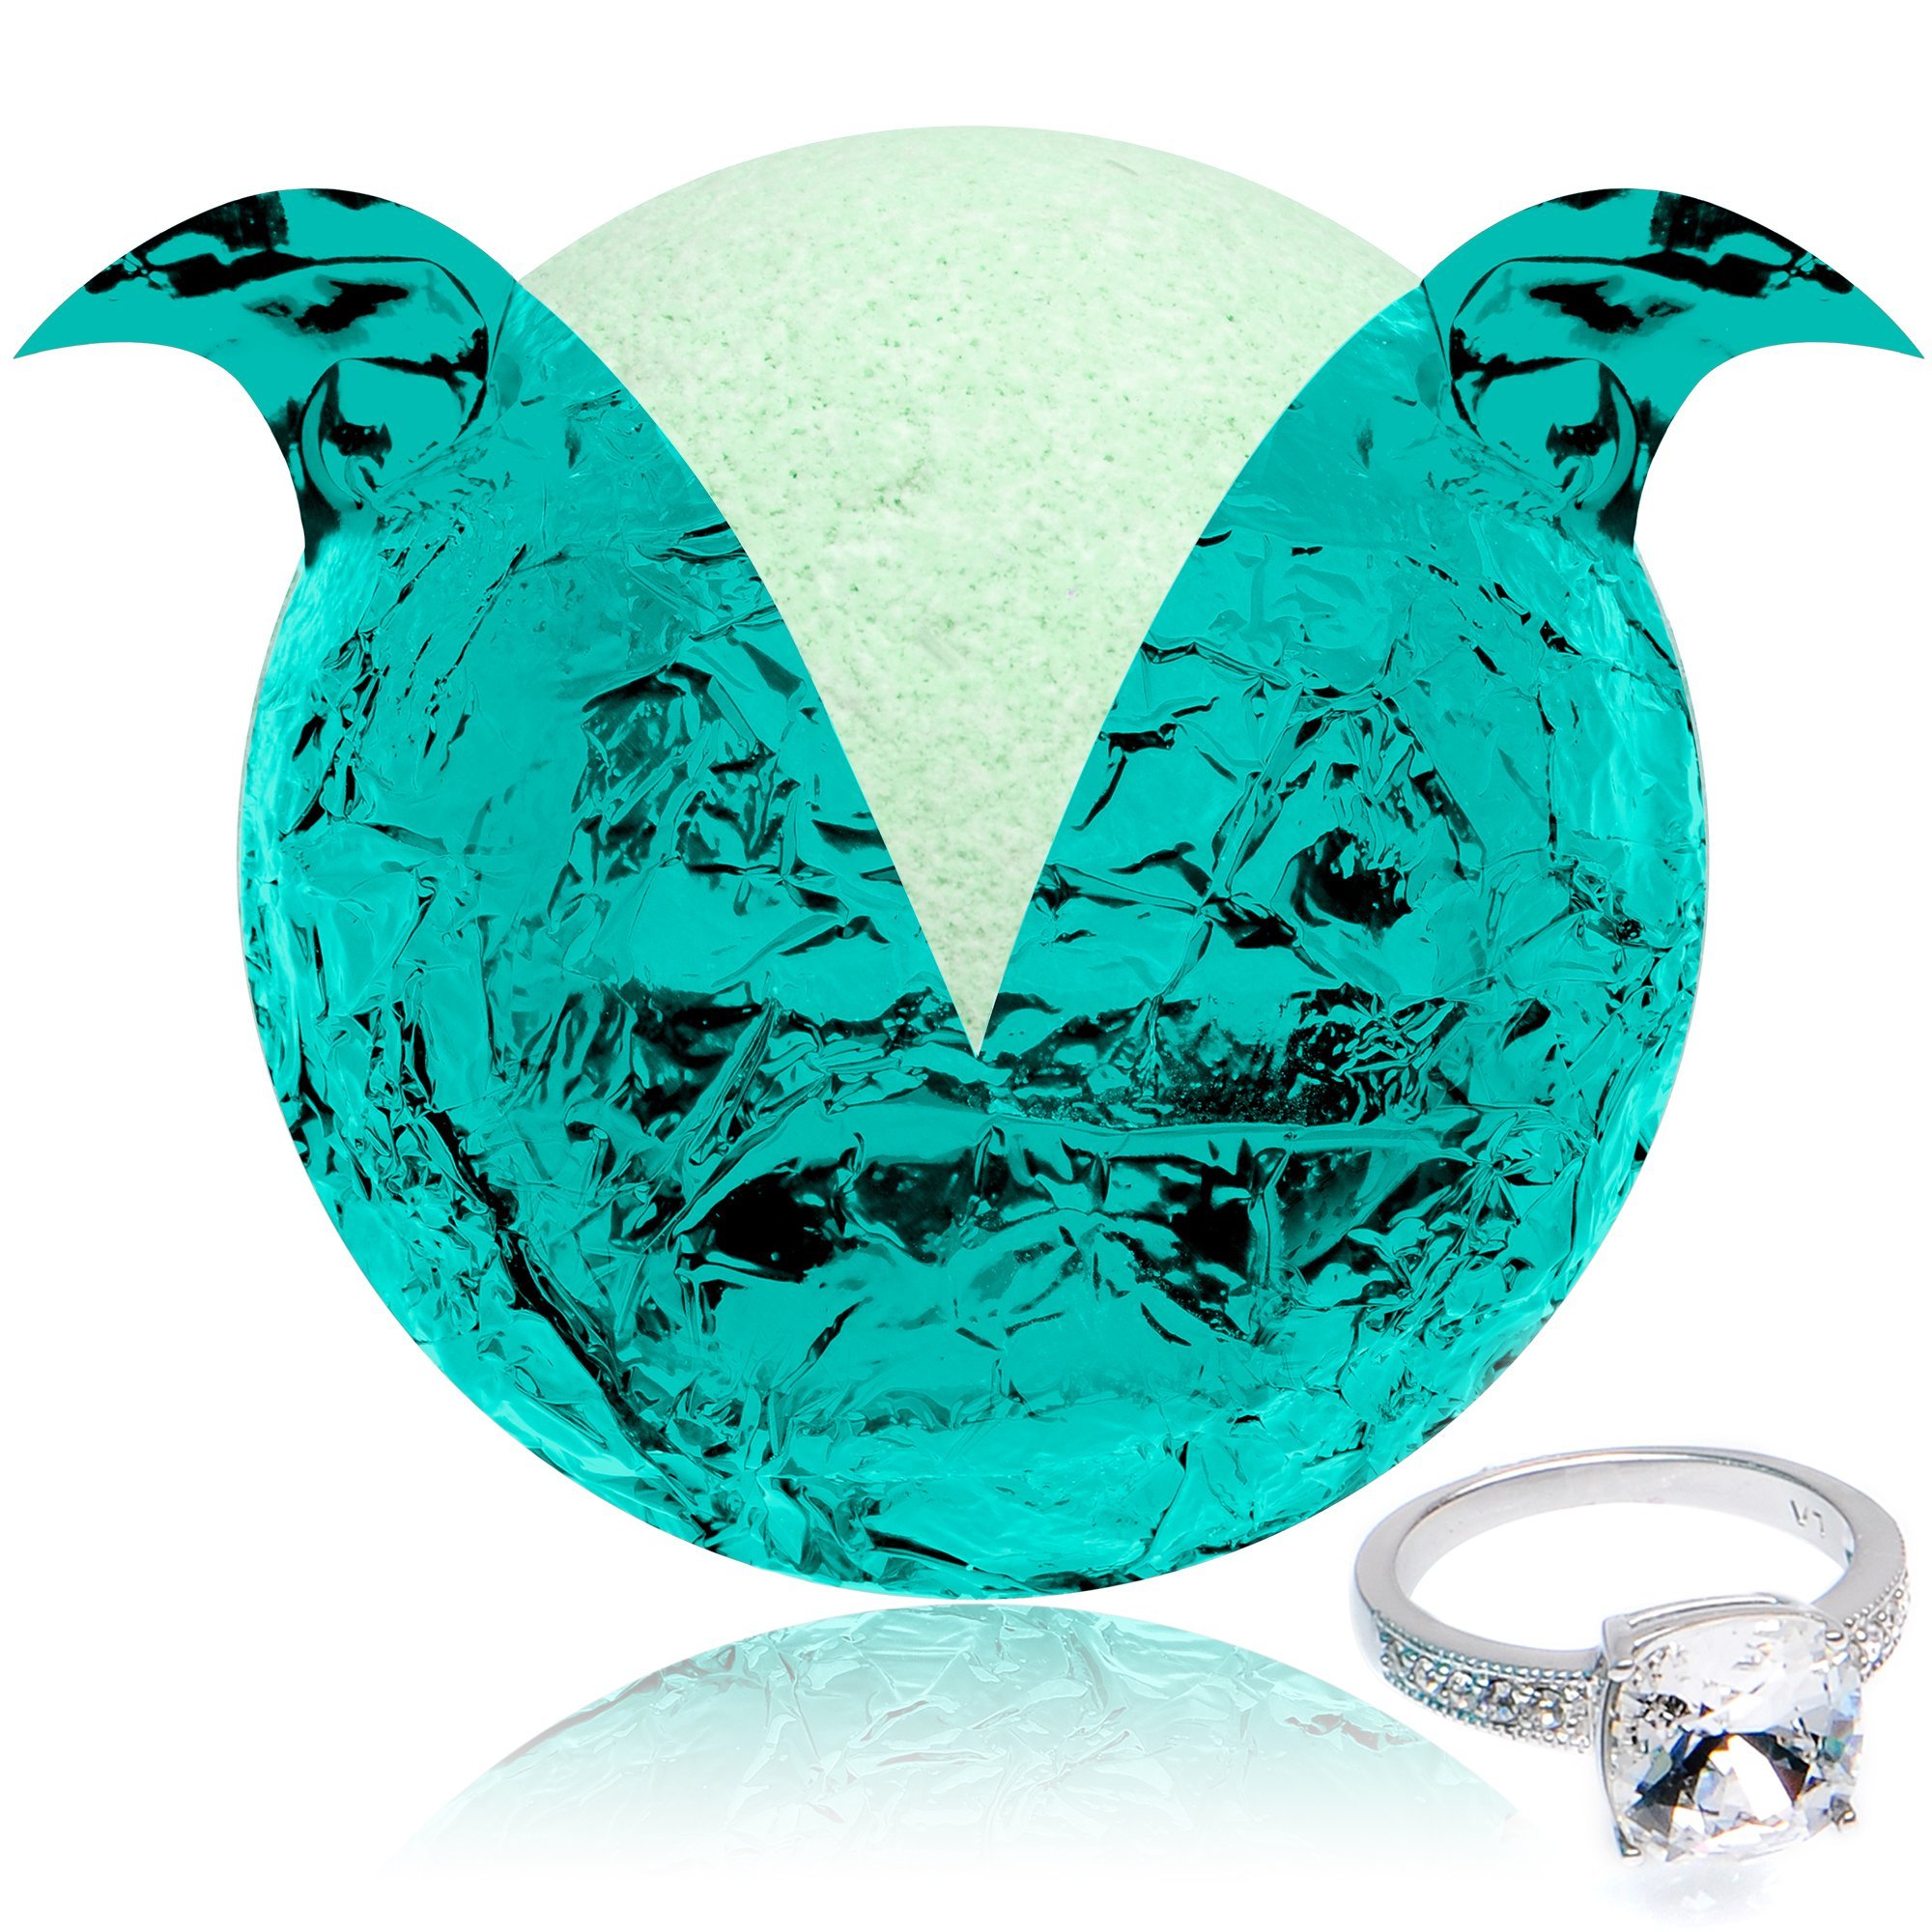 Jackpot Candles Bath Bomb with Ring Surprise Inside Mermaid Daydream Extra Large Made in USA - image 3 of 9